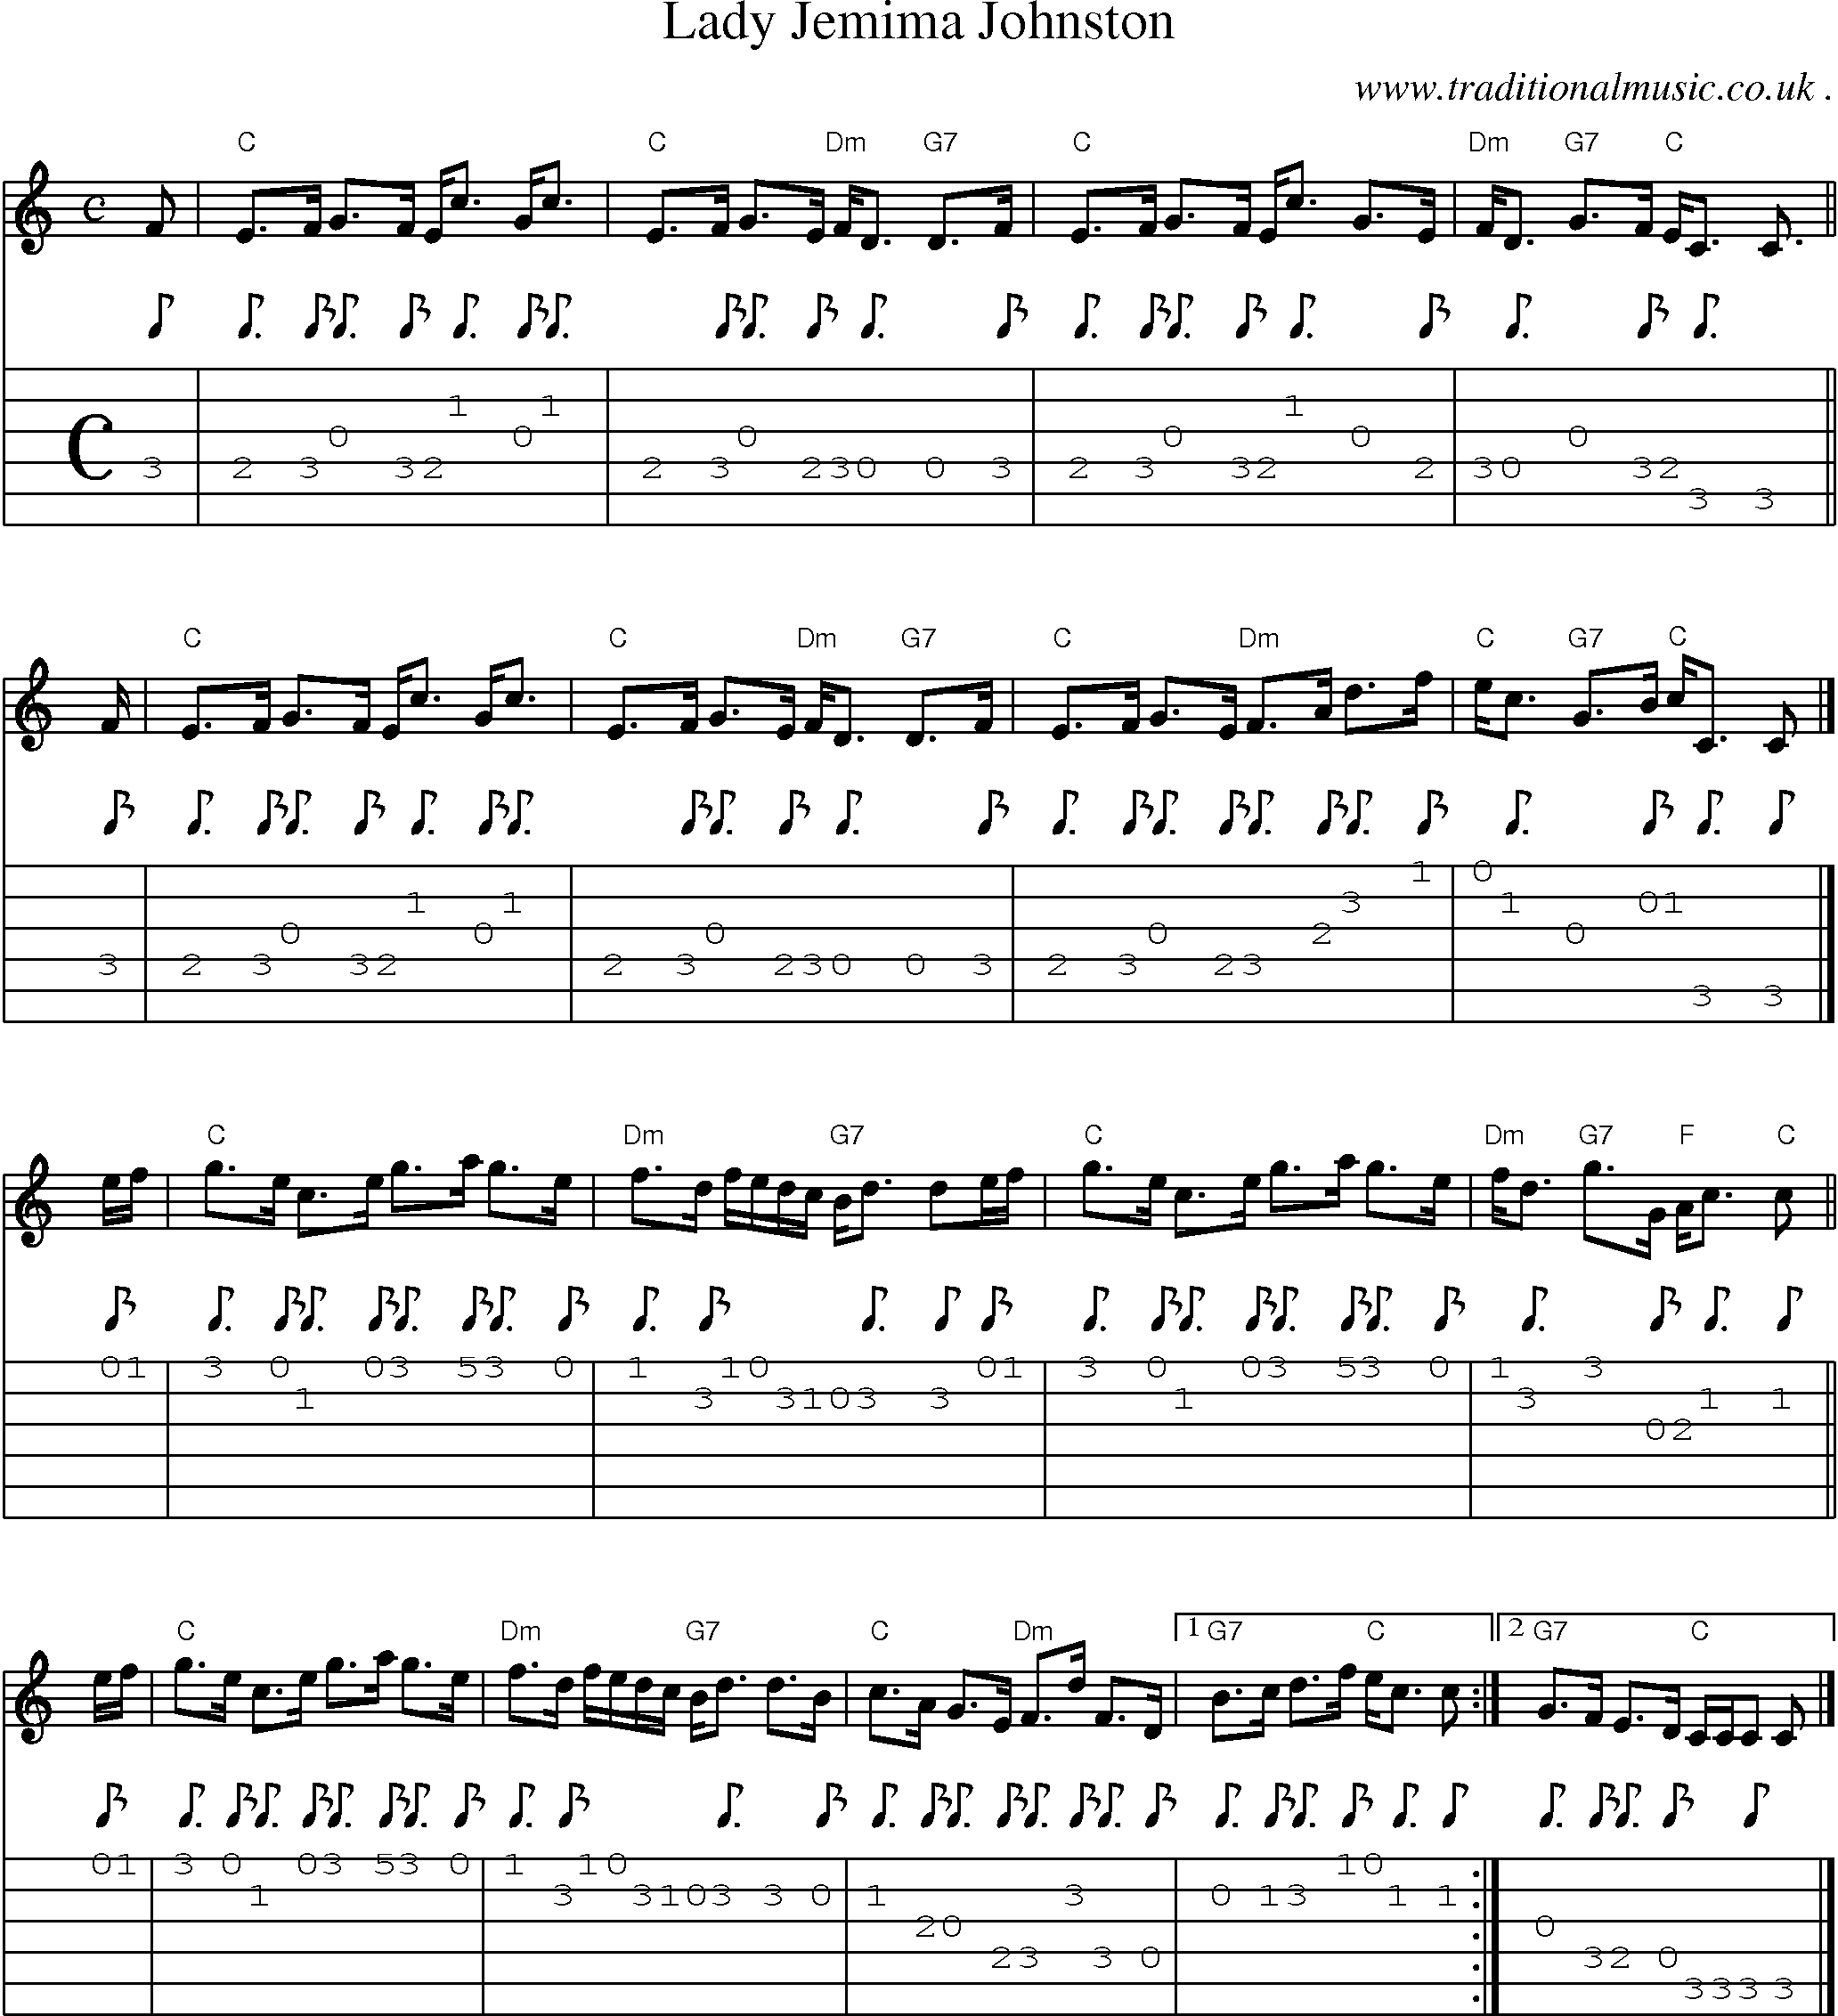 Sheet-music  score, Chords and Guitar Tabs for Lady Jemima Johnston